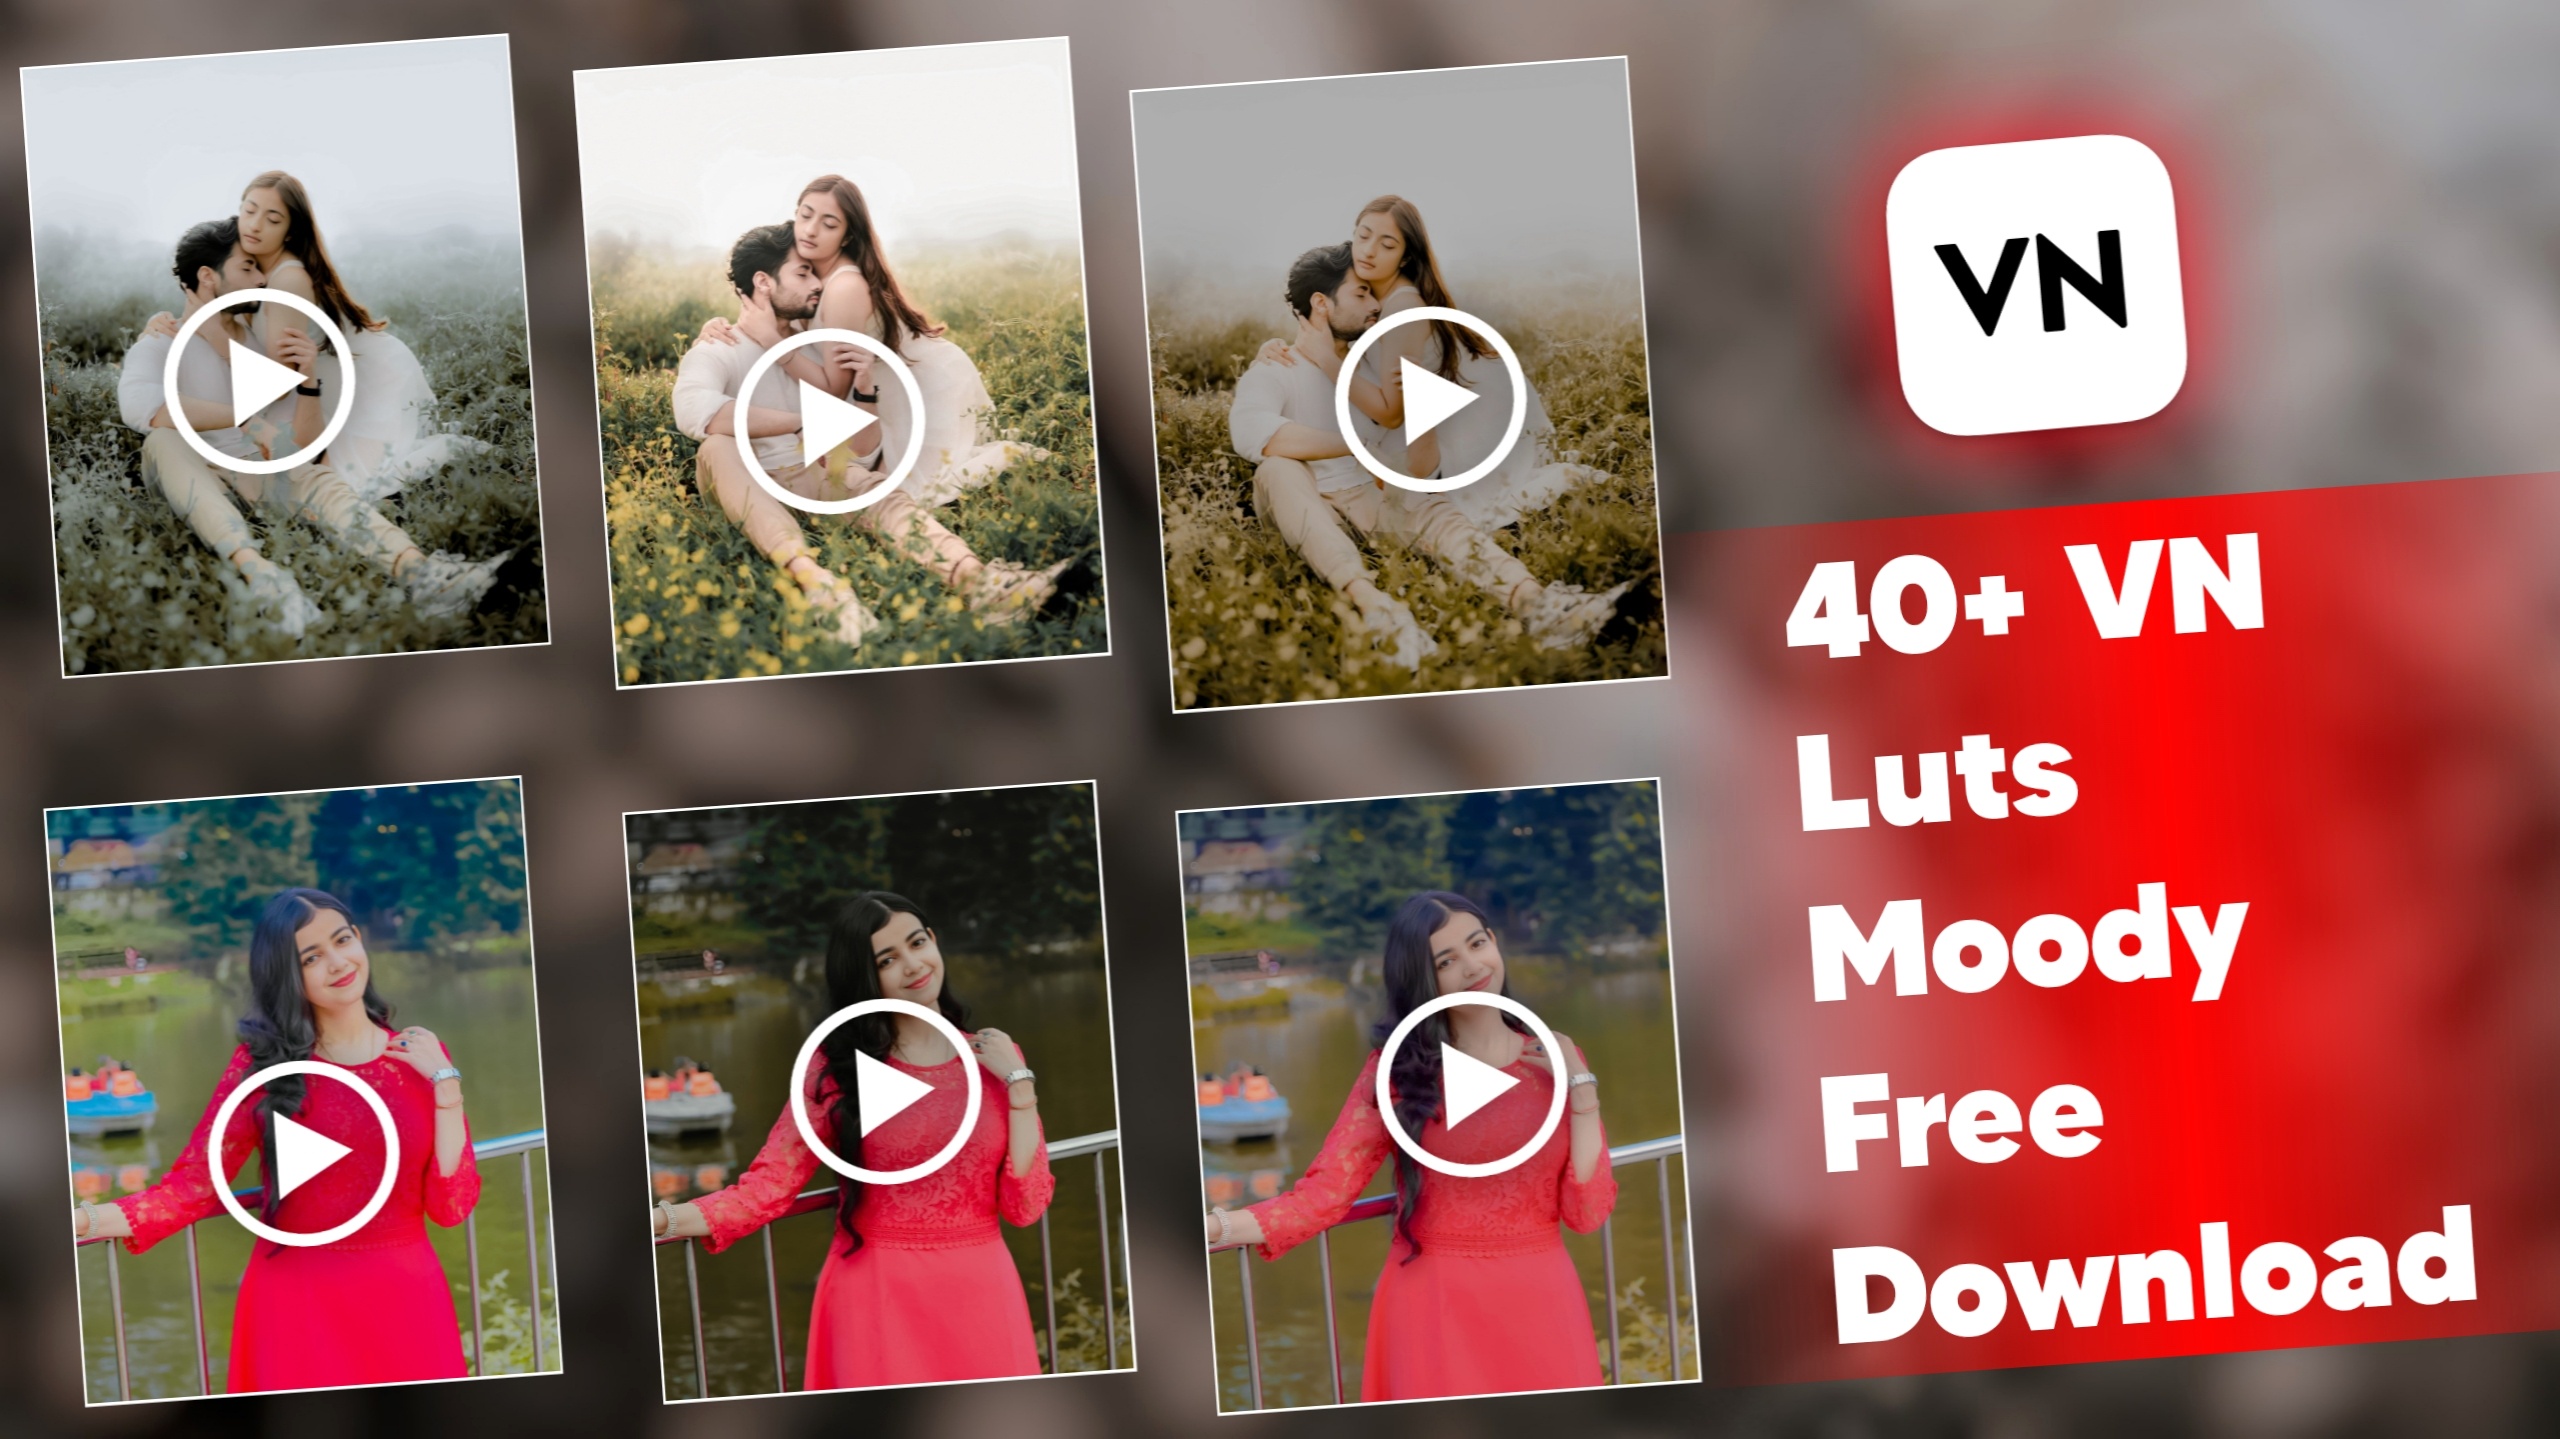 49+ Vn Luts Moody Free Download